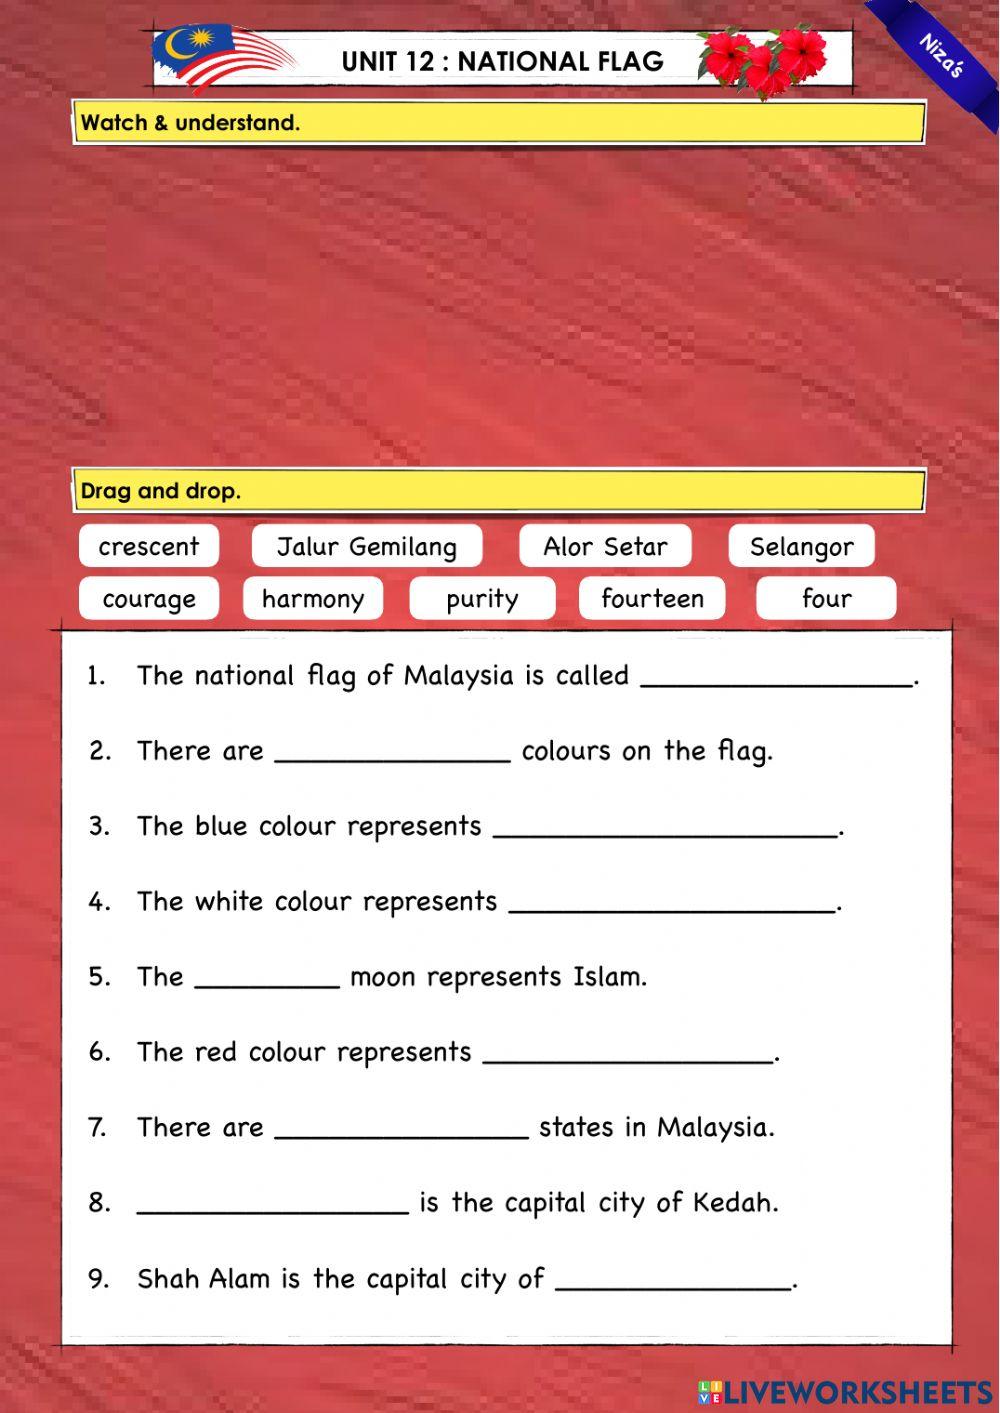 Unit 12 : our national flag